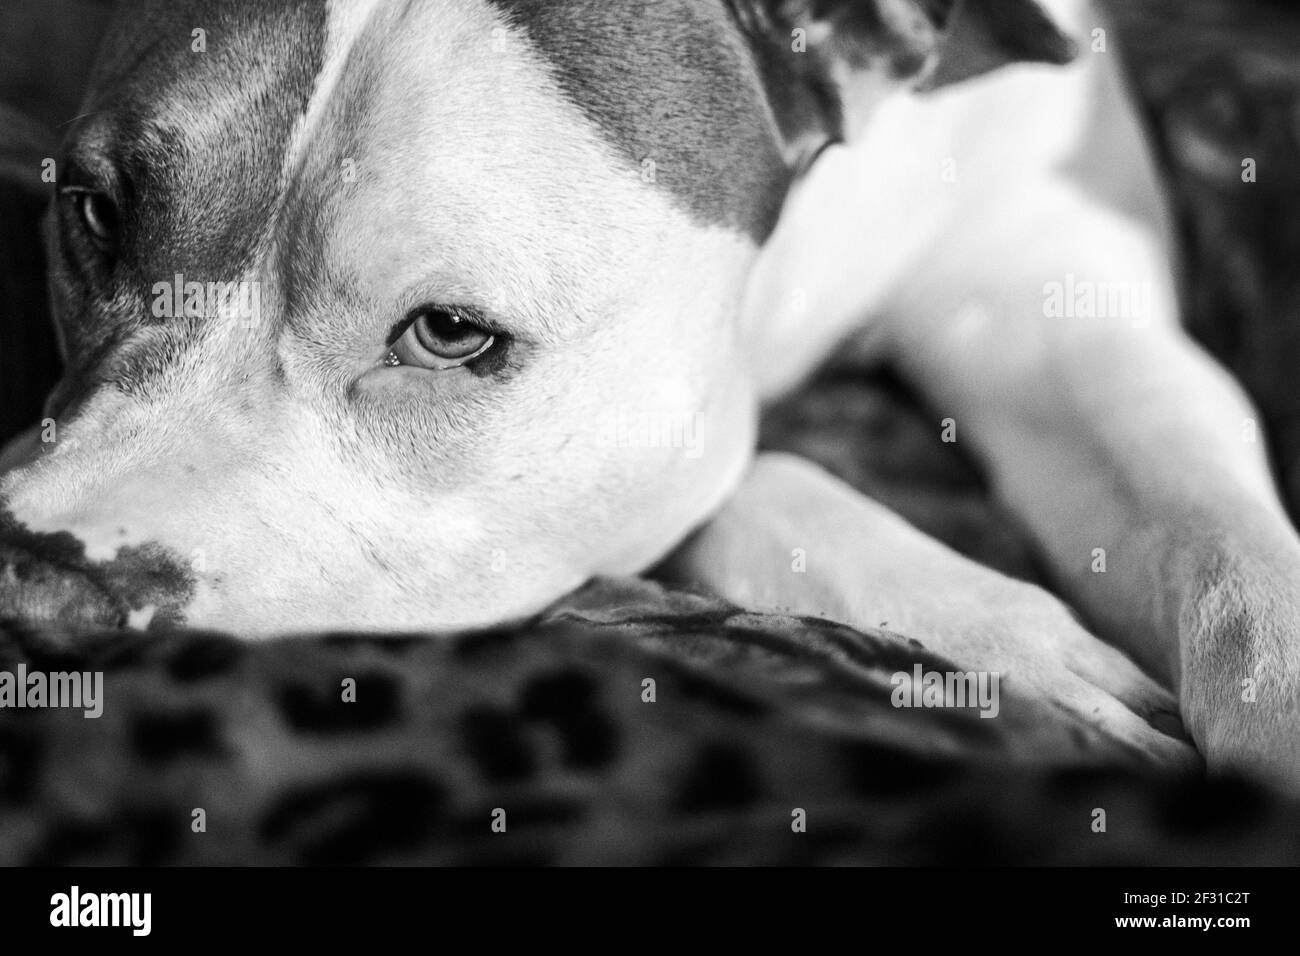 A mixed breed dog (American Staffordshire Pit Bull Terrier and American Pit Bull Terrier) (Canis lupus familiaris) looks out of the corner of his eye. Stock Photo